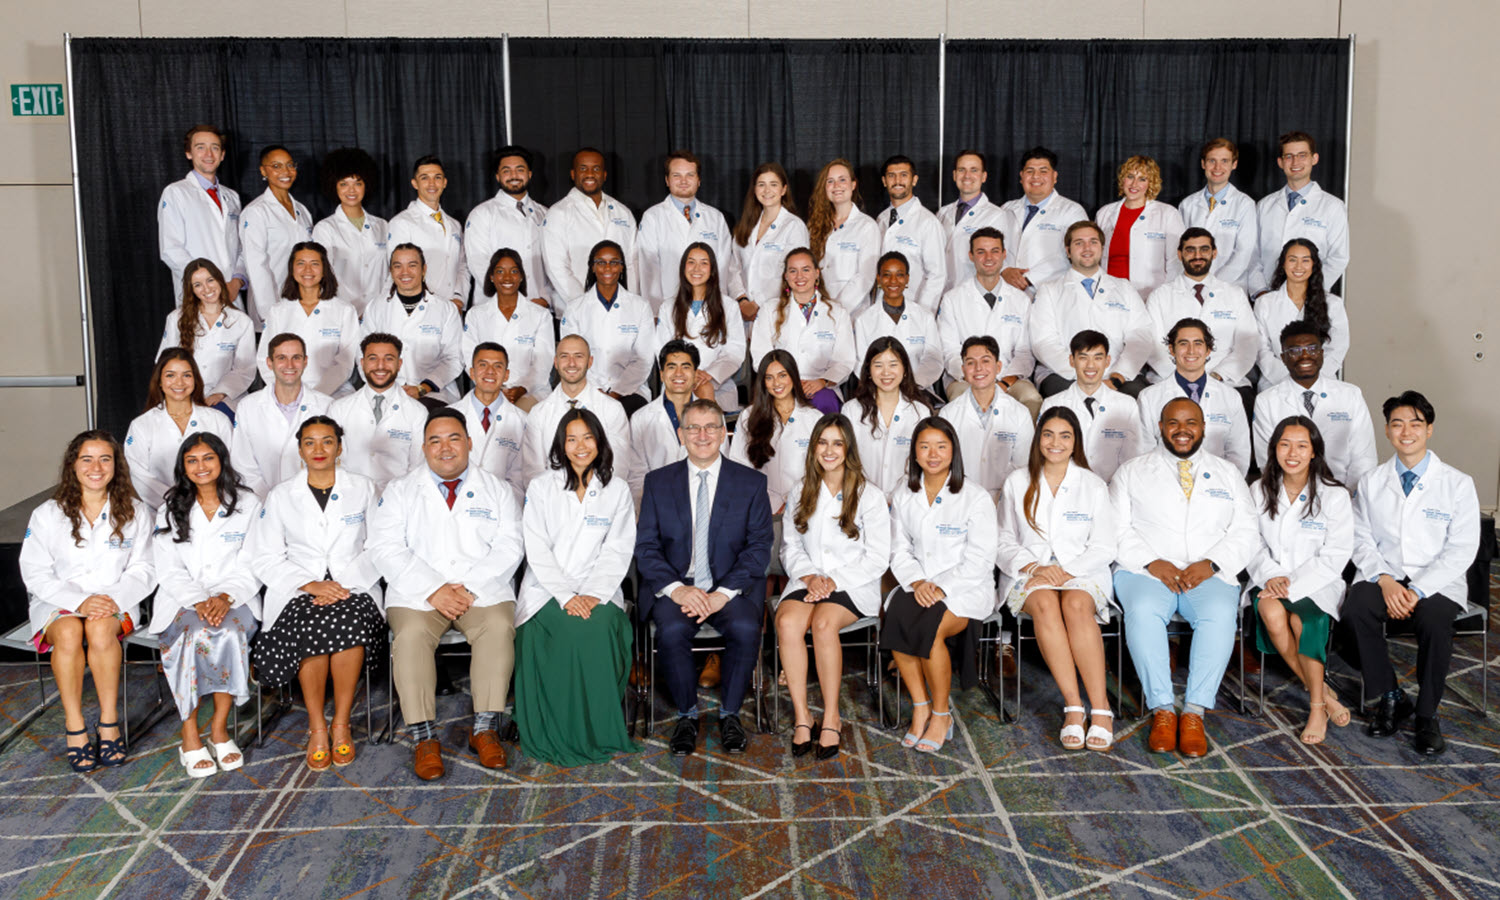 The KPSOM Class of 2027 poses for a class photo with Founding Dean and CEO Mark Schuster.